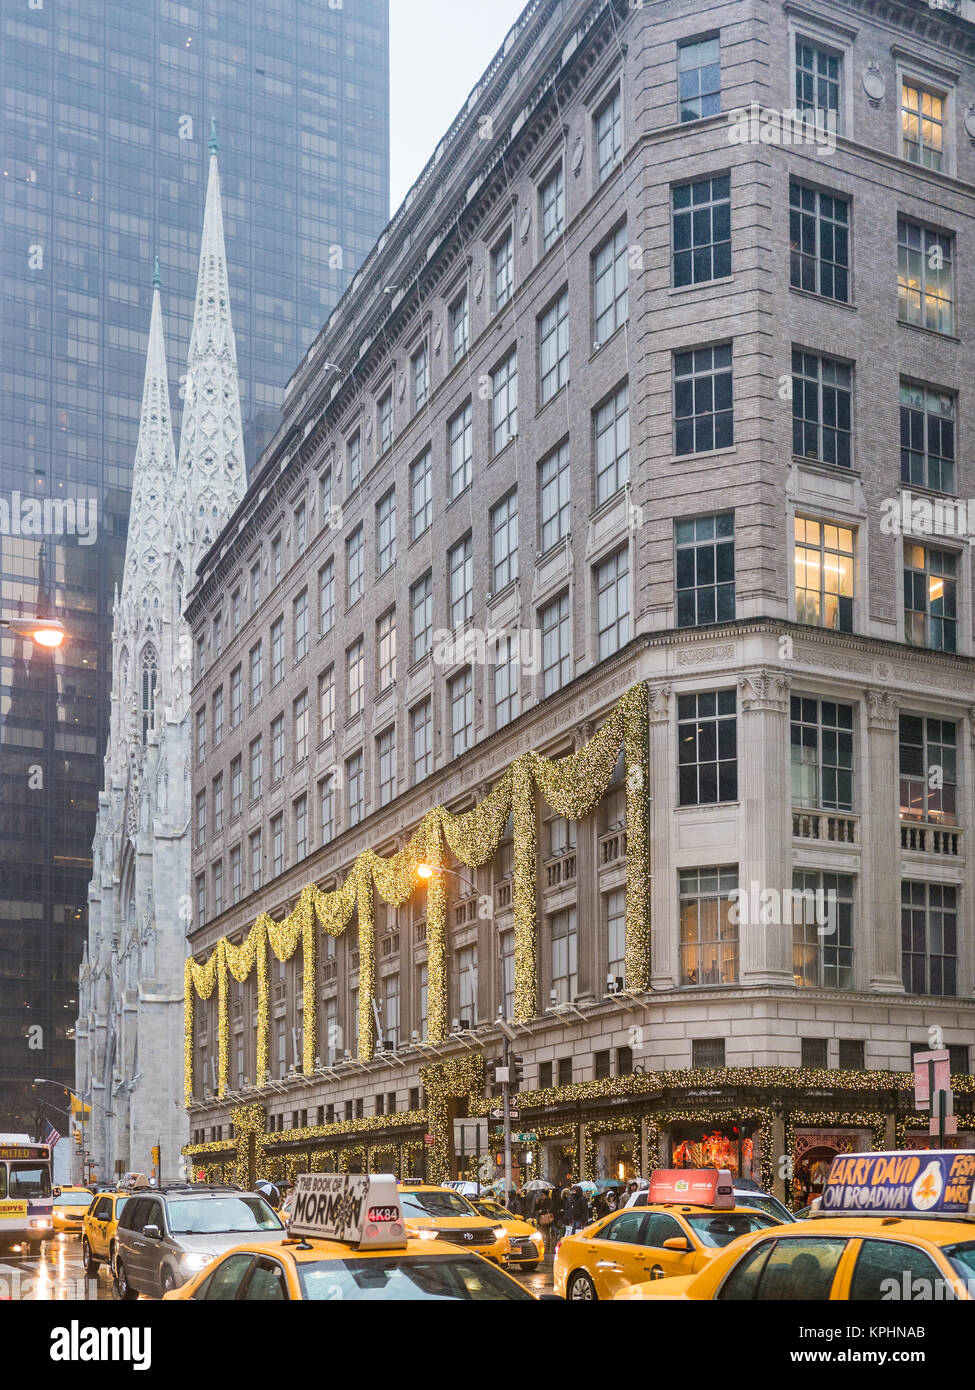 NEW YORK, USA - January 3, 2015: Flagship store of Saks on Fifth Avenue in New York City. Saks store in 5th Avenue is their flagship location. Stock Photo